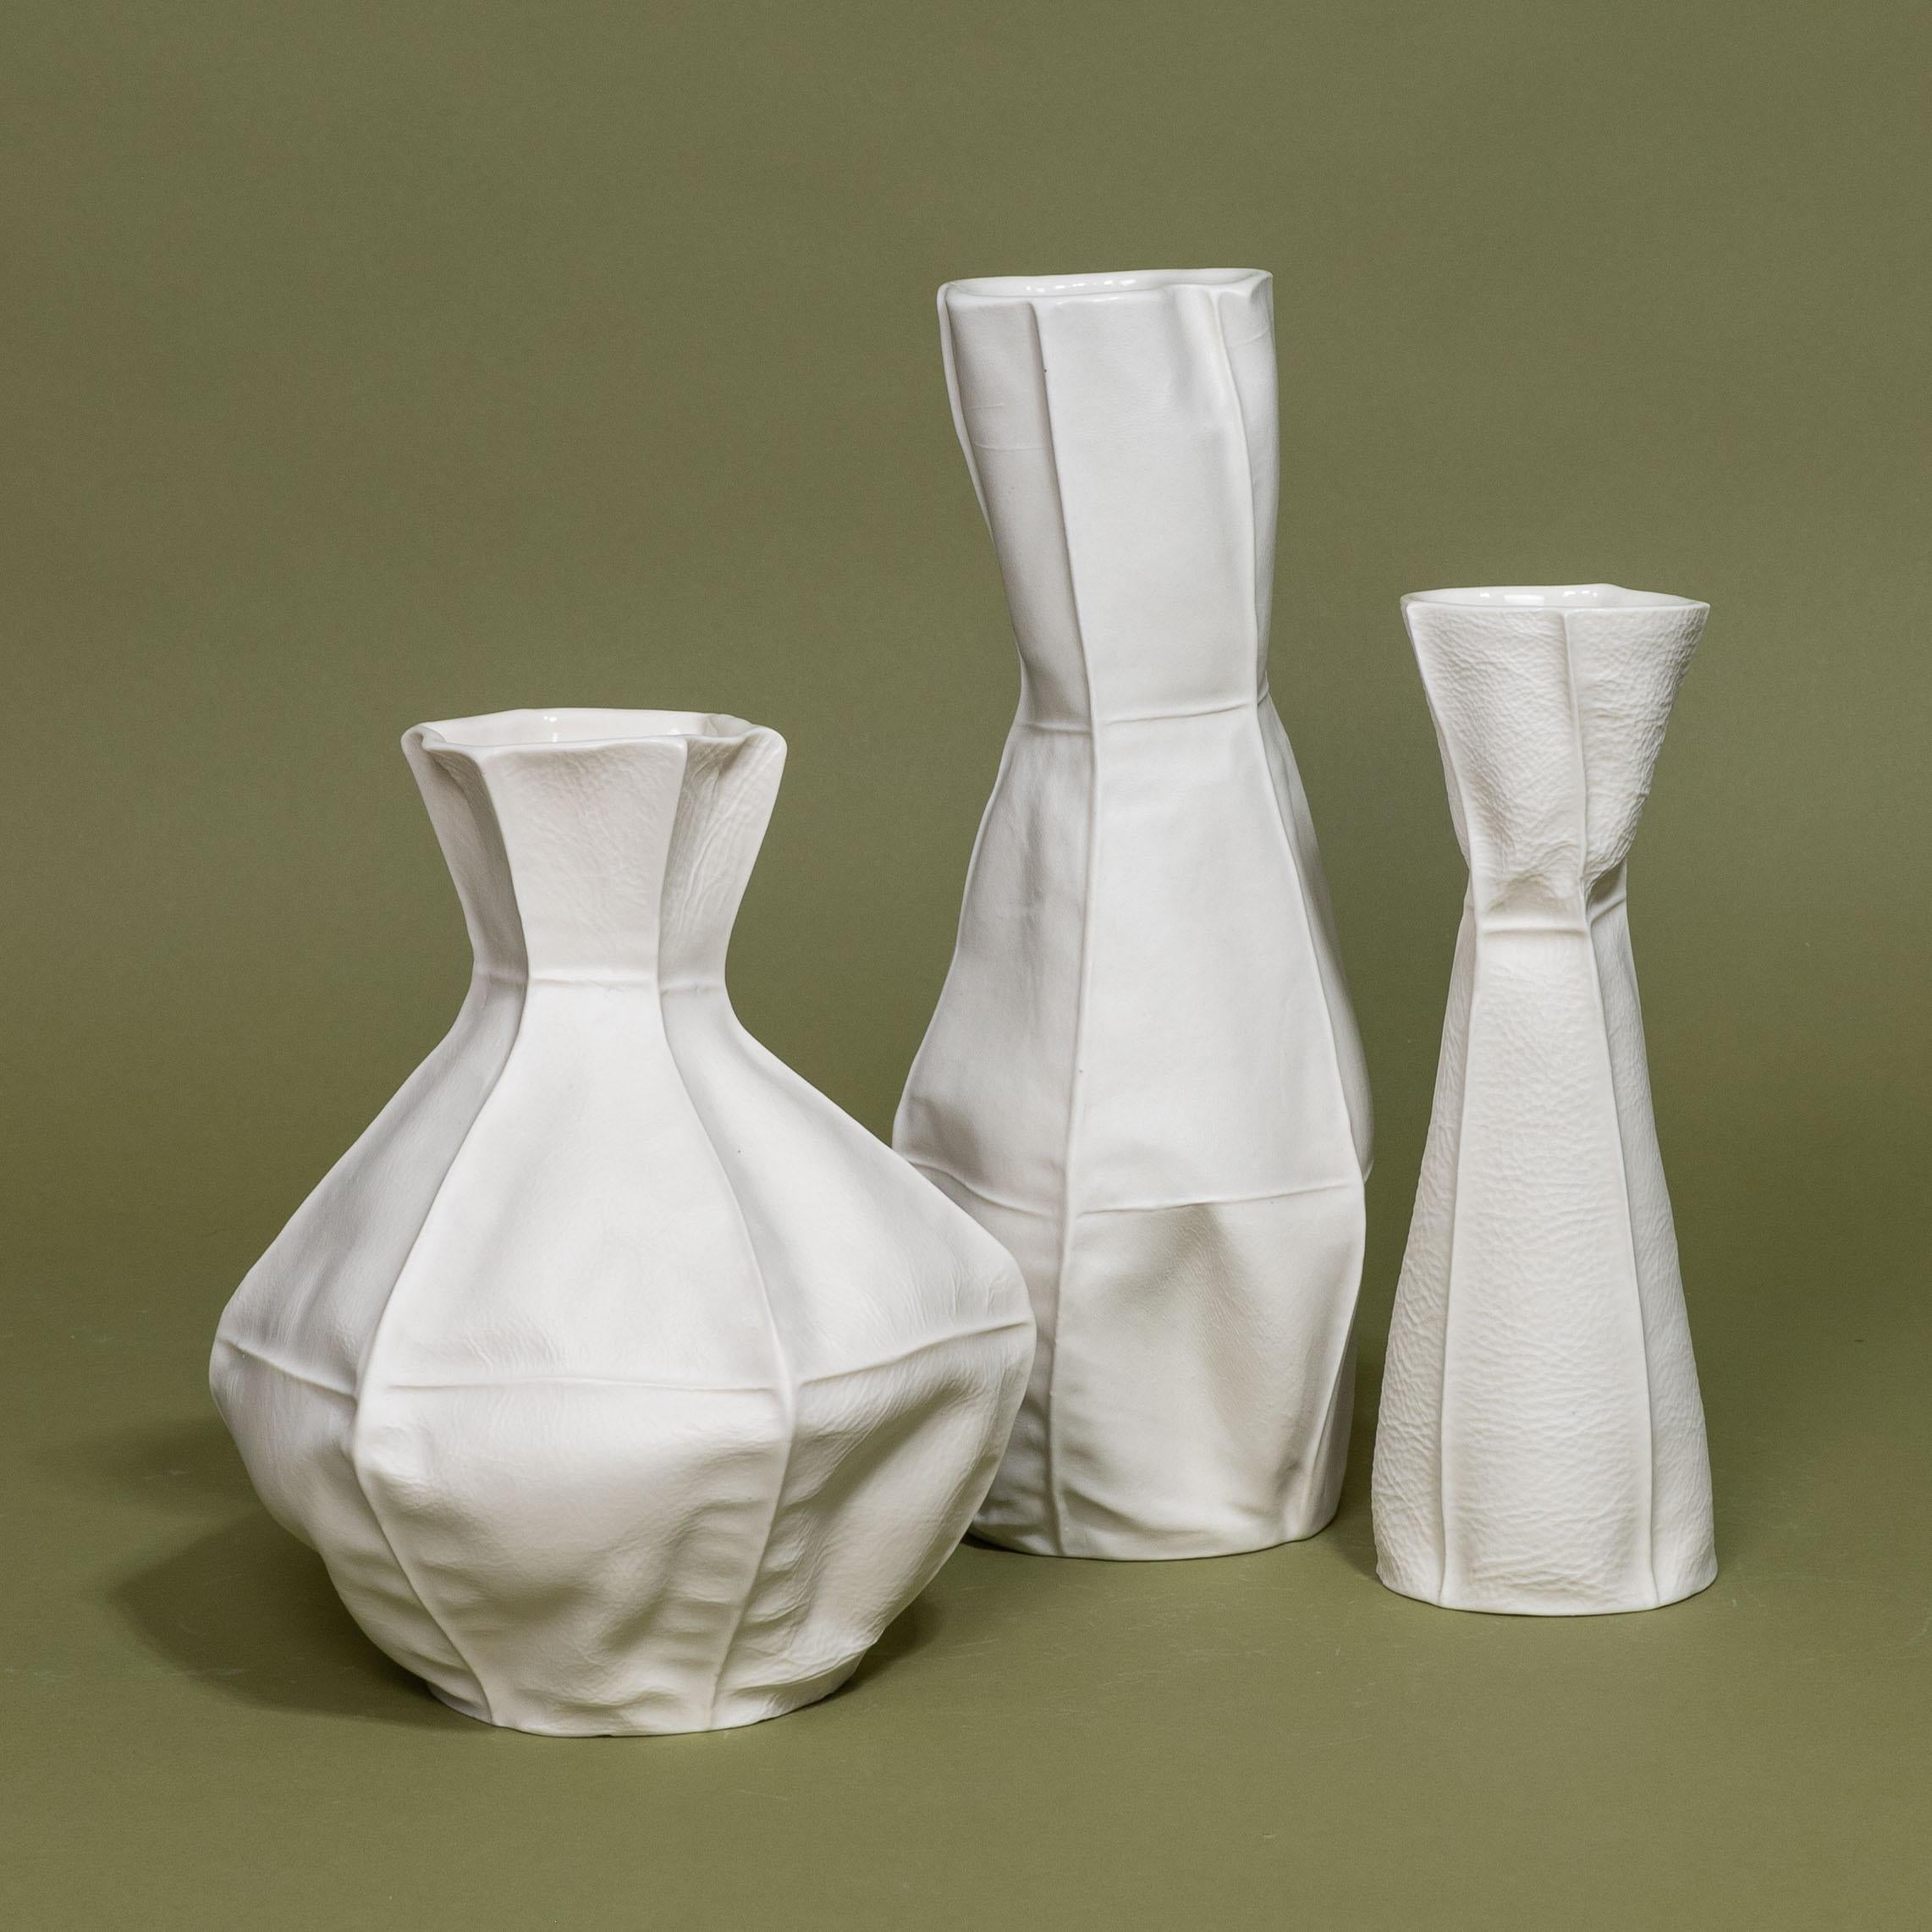 A set of three white ceramic Kawa Vases by Luft Tanaka Studio. Each item is made by casting porcelain into sewn leather molds and are truly one-of-a-kind.

As a result of the production process, each item is one-of-a-kind. Set includes three vases